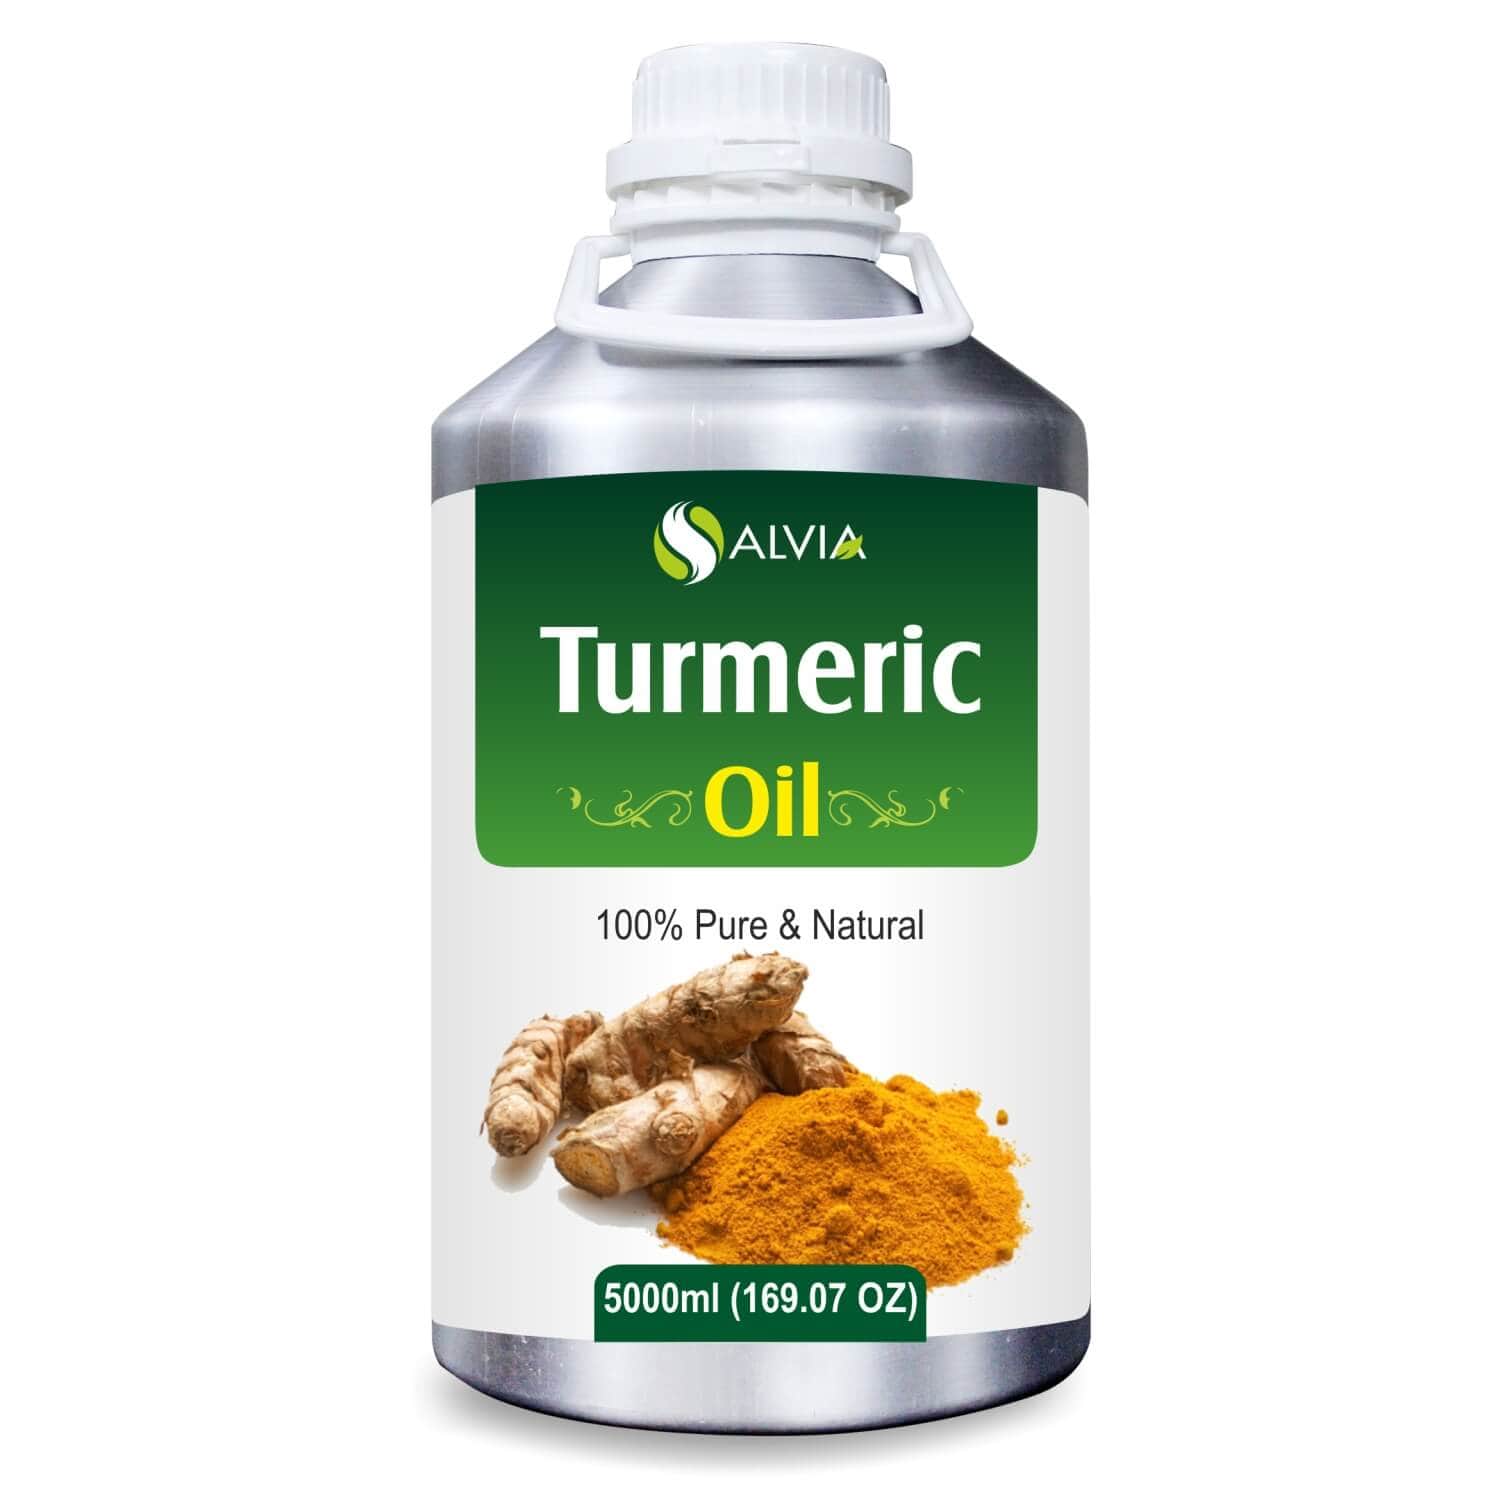 Salvia Natural Essential Oils 5000ml Turmeric Oil (Curcuma Longa) Pure Essential Oil Reduces Blemishes, Rejuvenates Skin, Promotes Overall Hair Health, Soothes Skin Problem, Manages Aging Signs